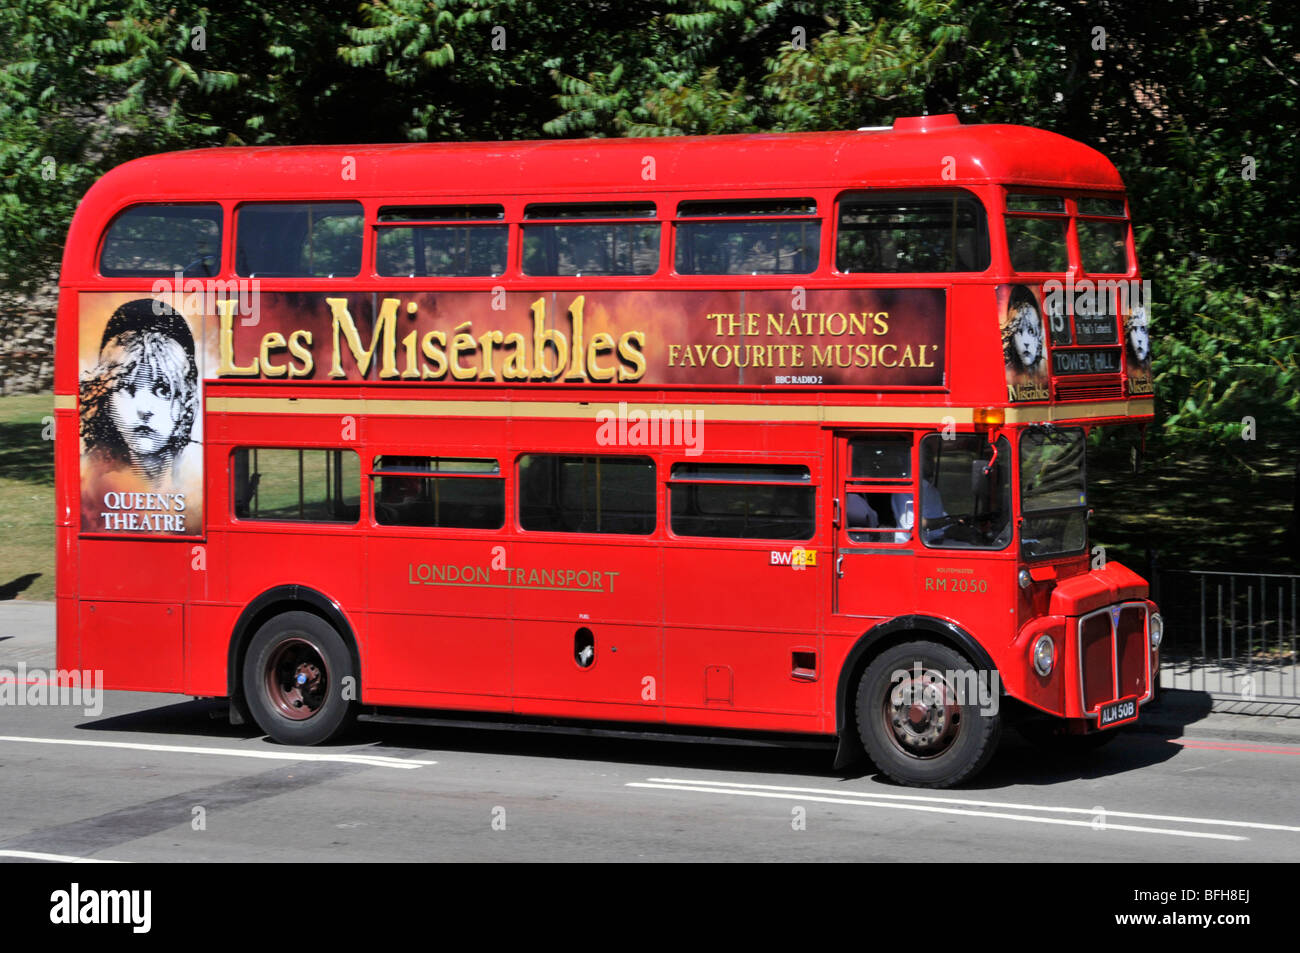 Side view red double decker classic iconic Routemaster London bus  advertising poster for famous Les Misérables musical at Queens Theatre England UK Stock Photo